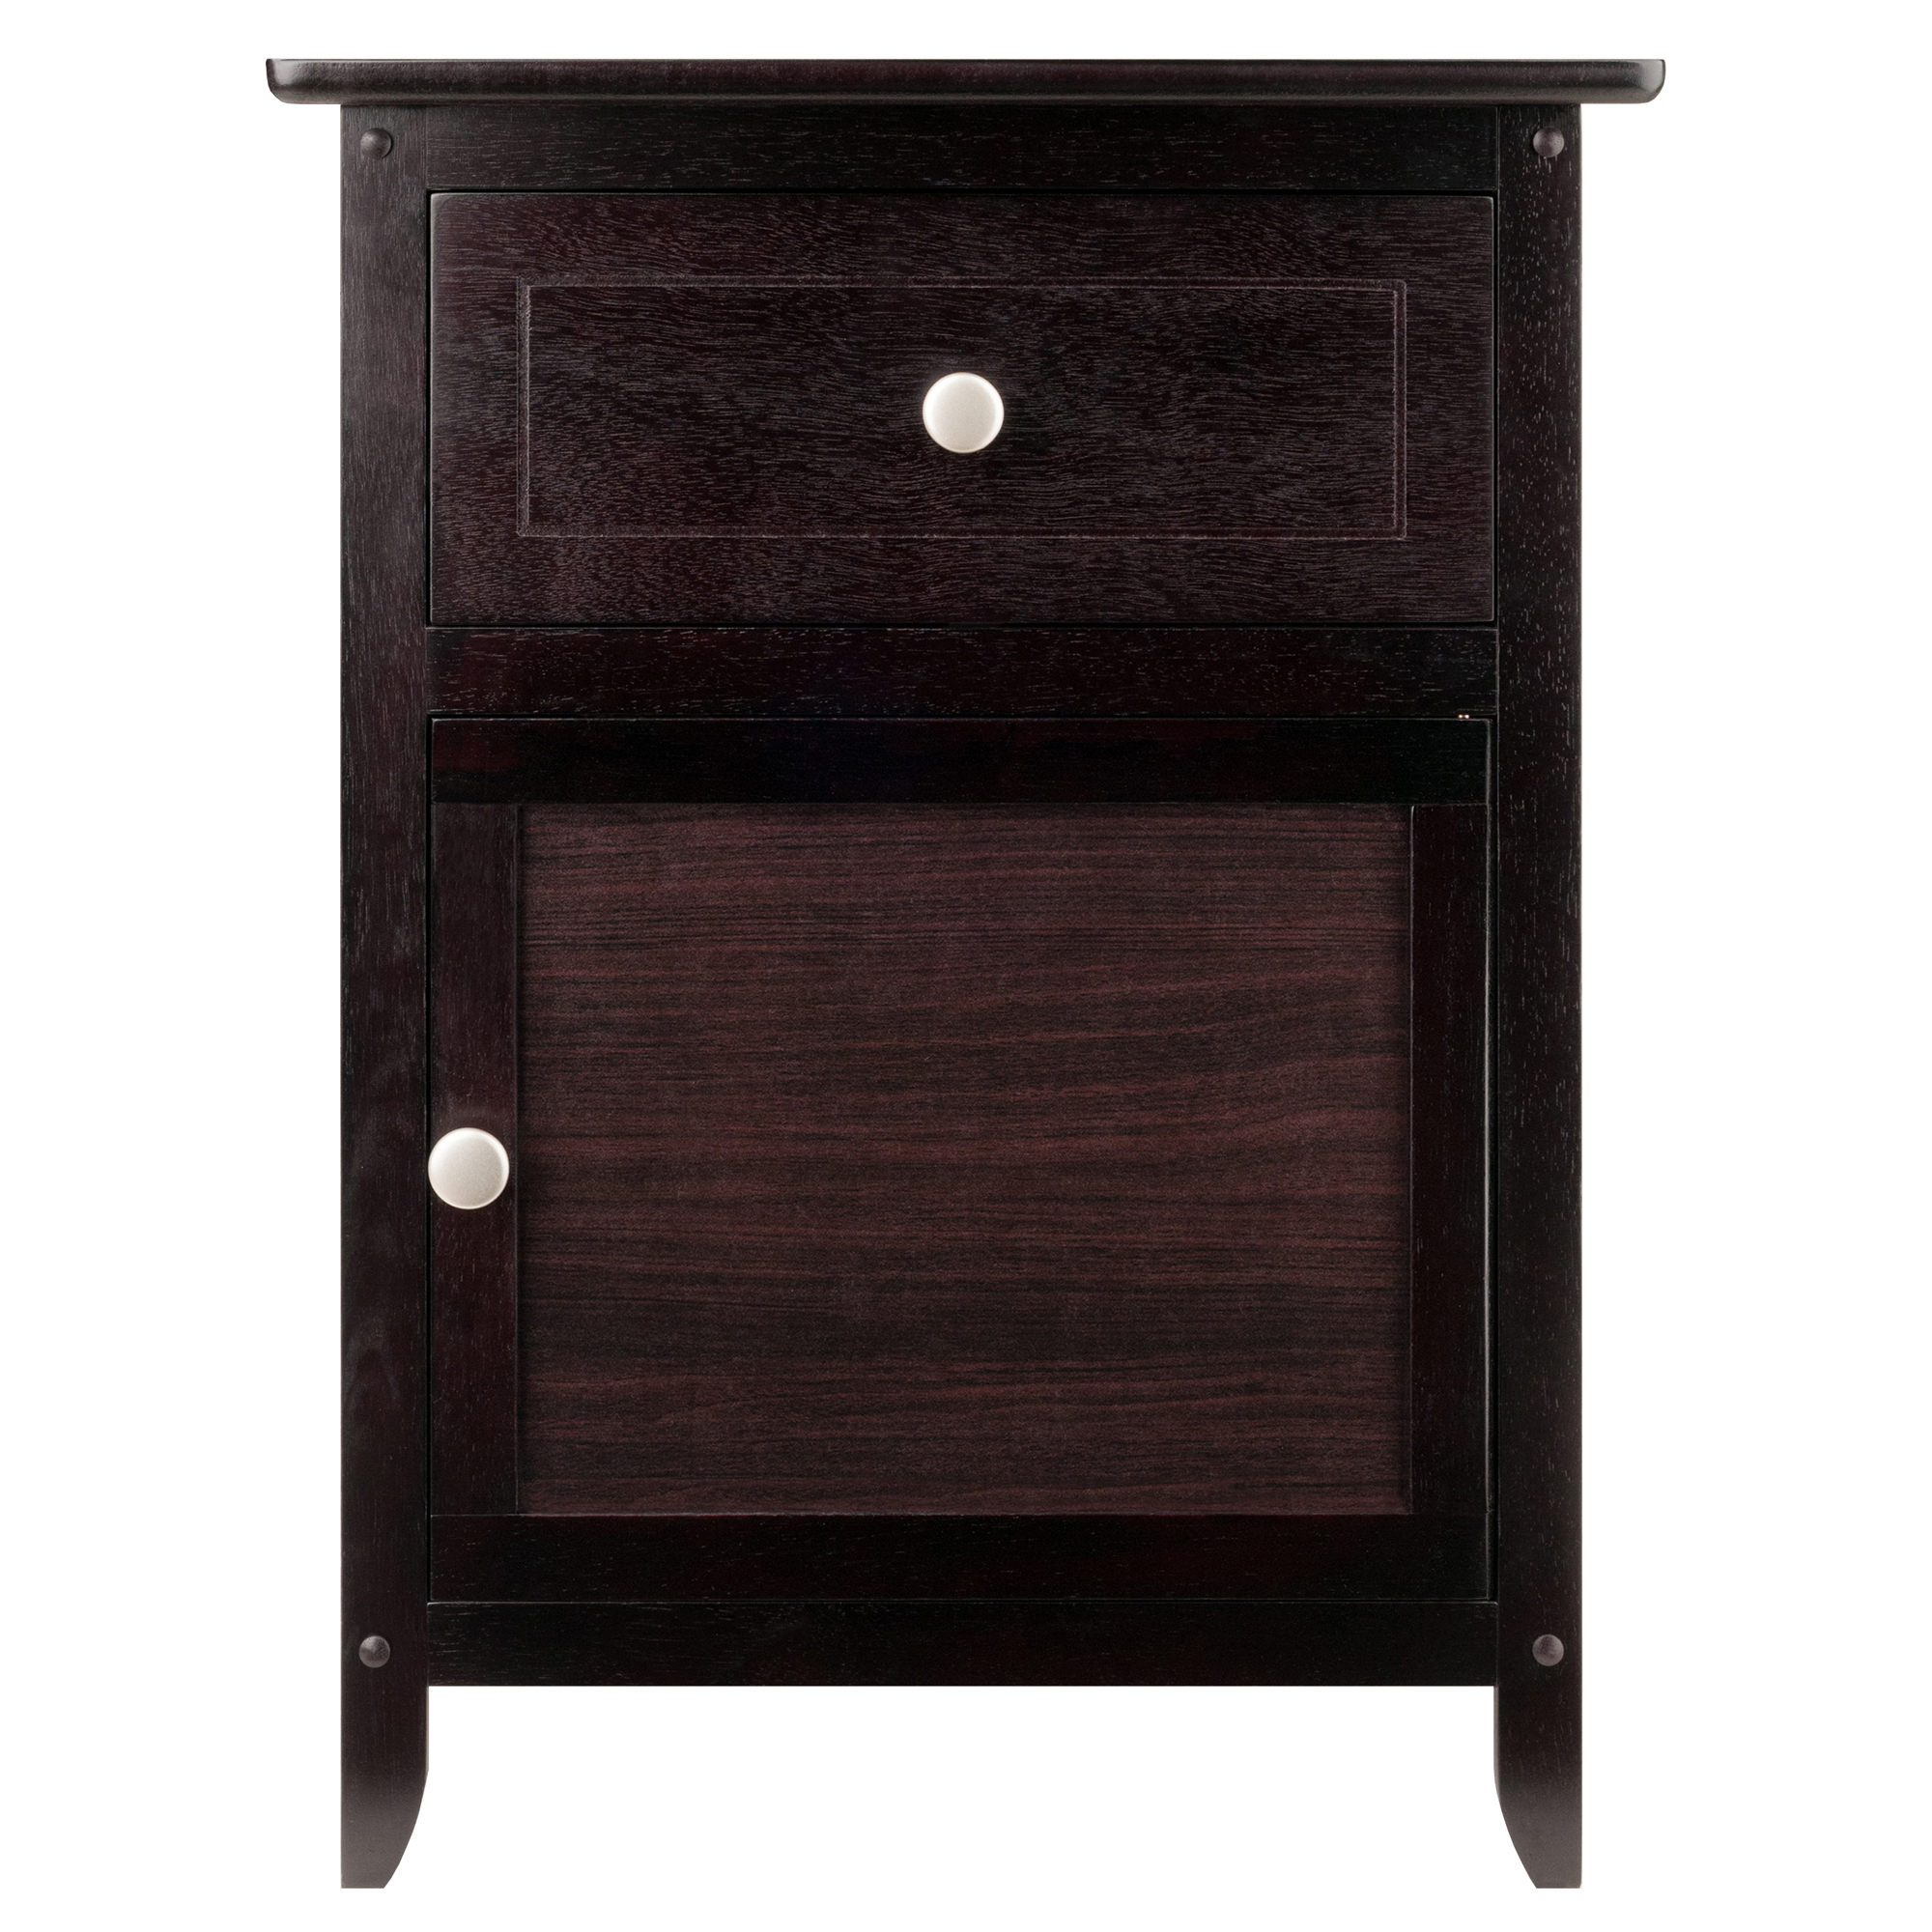 Winsome Wood Eugene Accent Table, Nightstand, Espresso Finish - image 4 of 9